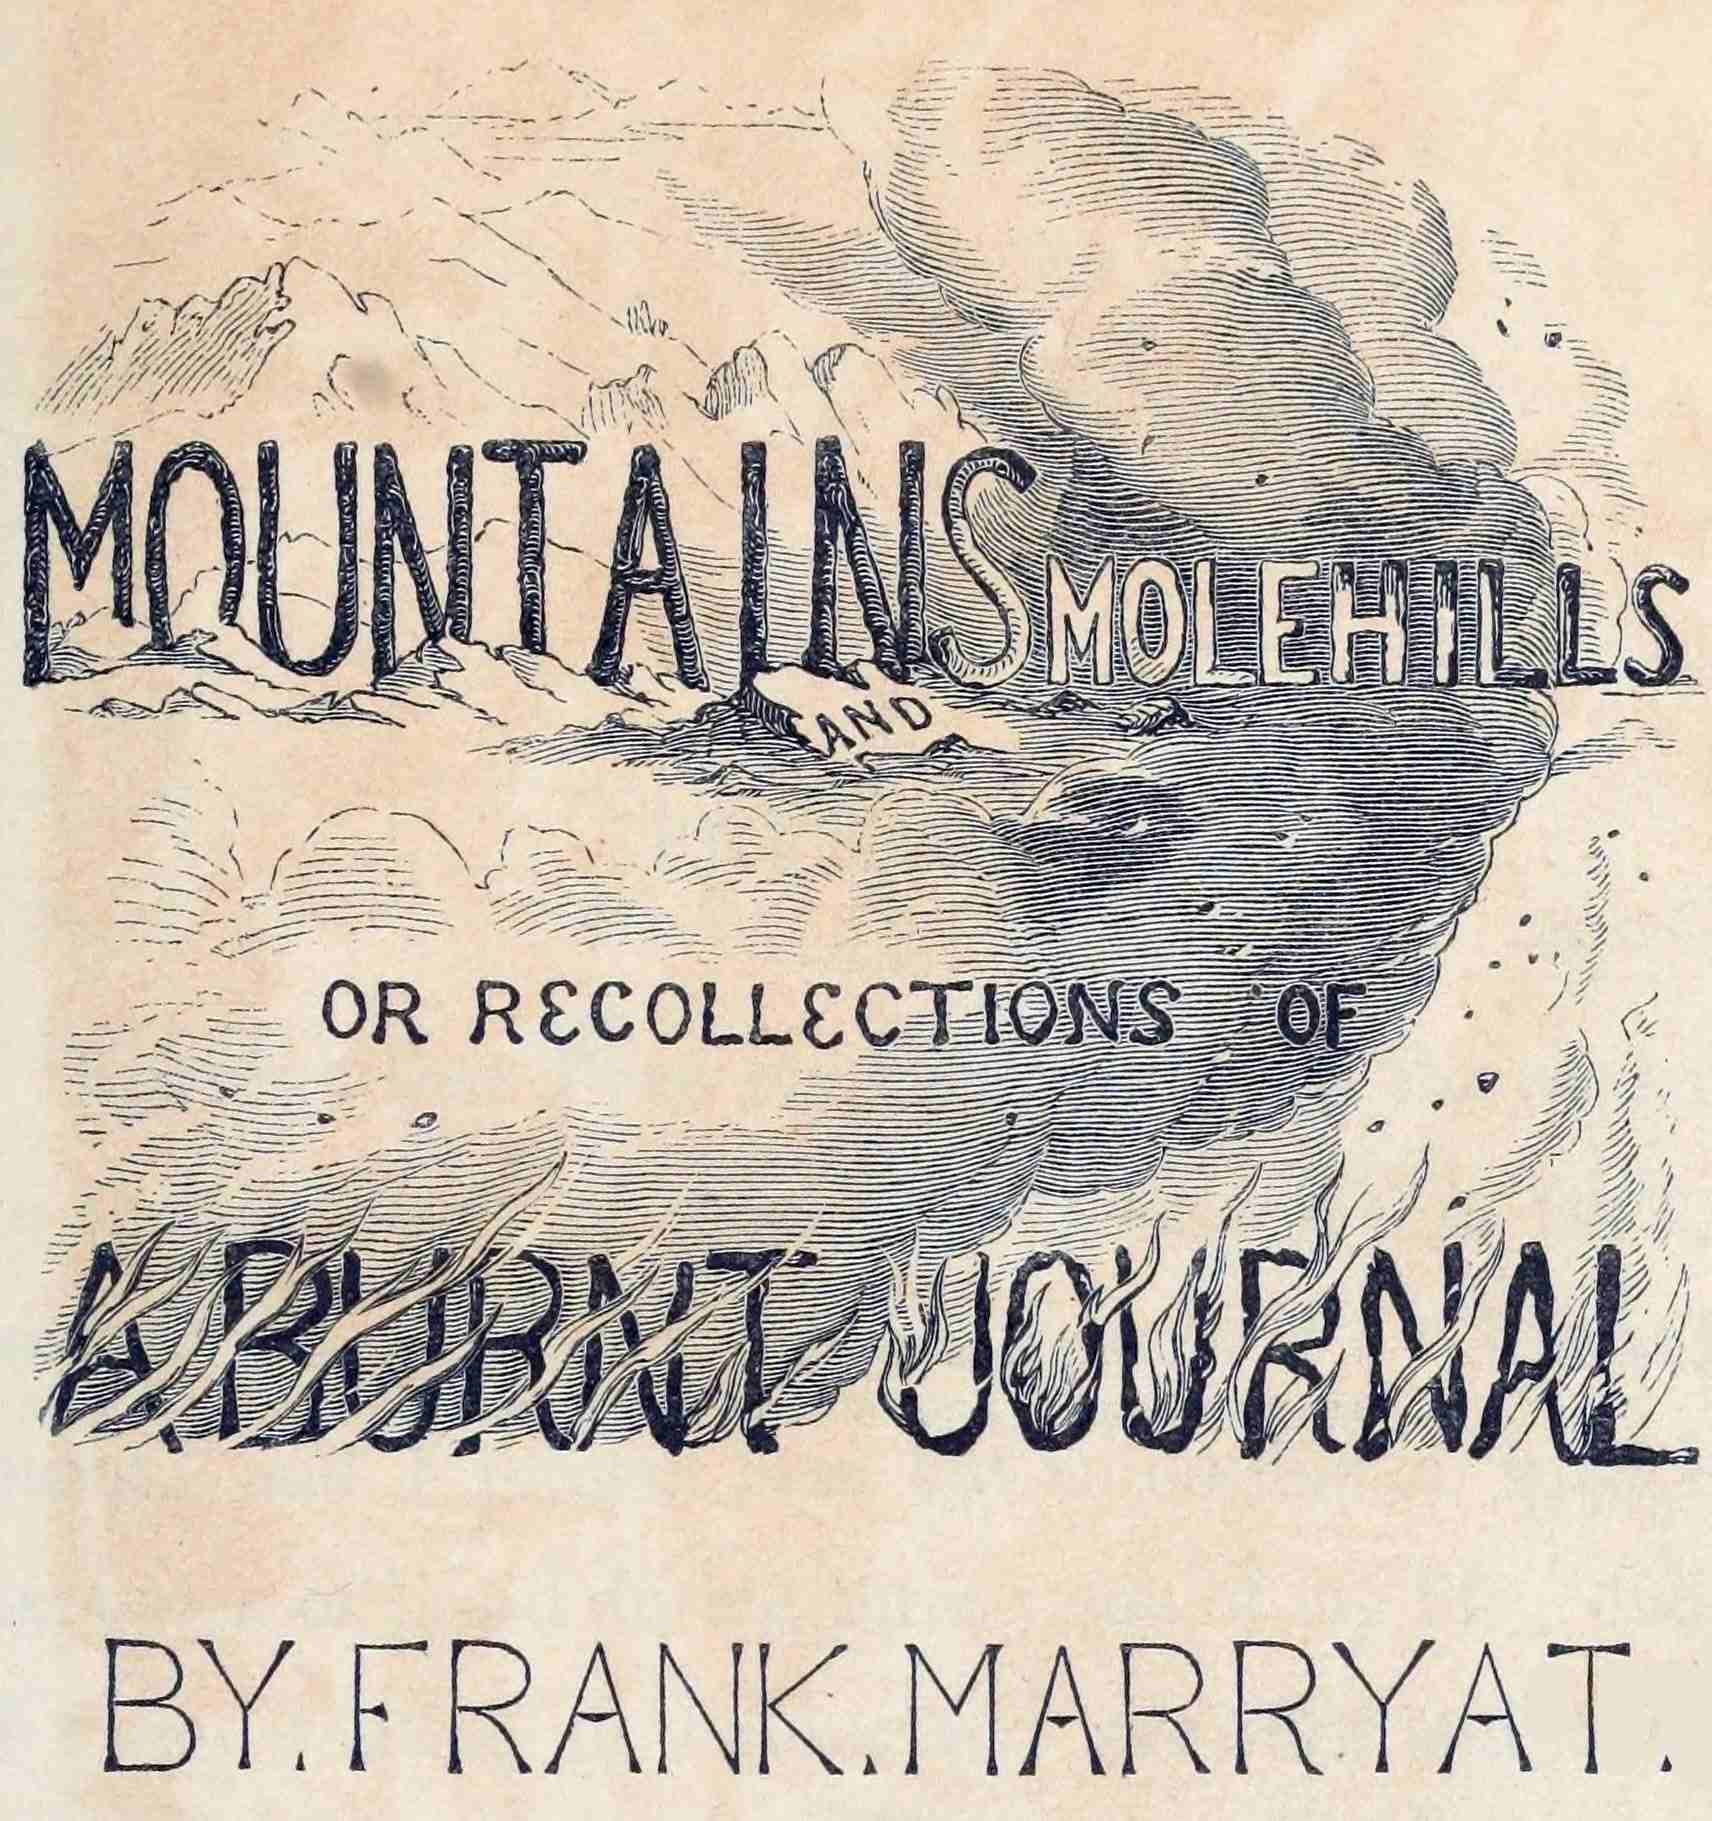 The Project Gutenberg eBook of Mountians and molehills; or Recollections of a burnt journal, by F